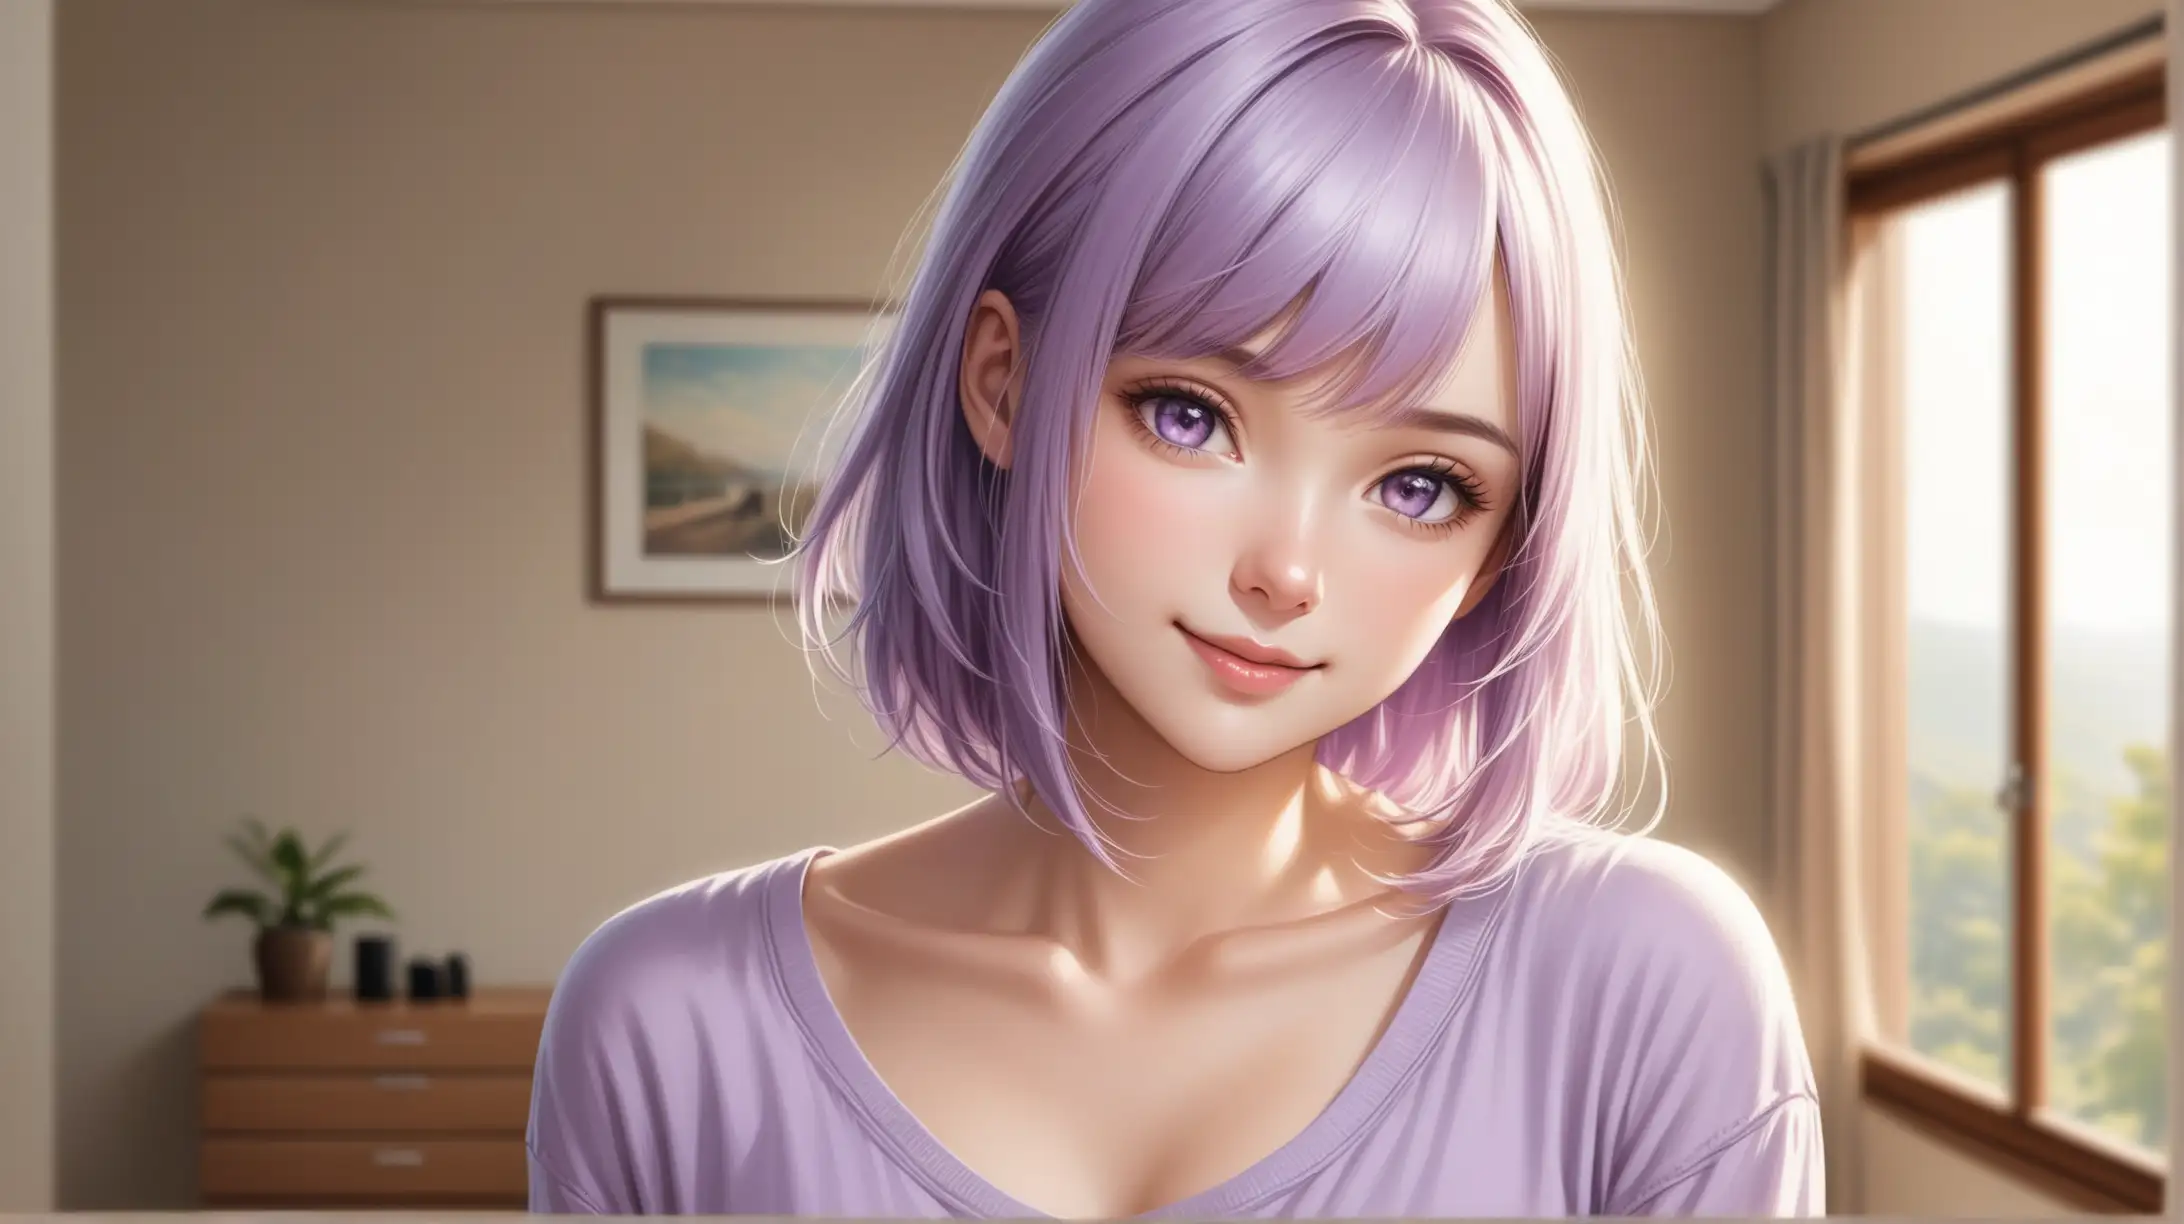 Seductive Woman with ShoulderLength Light Purple Hair in Casual Pose